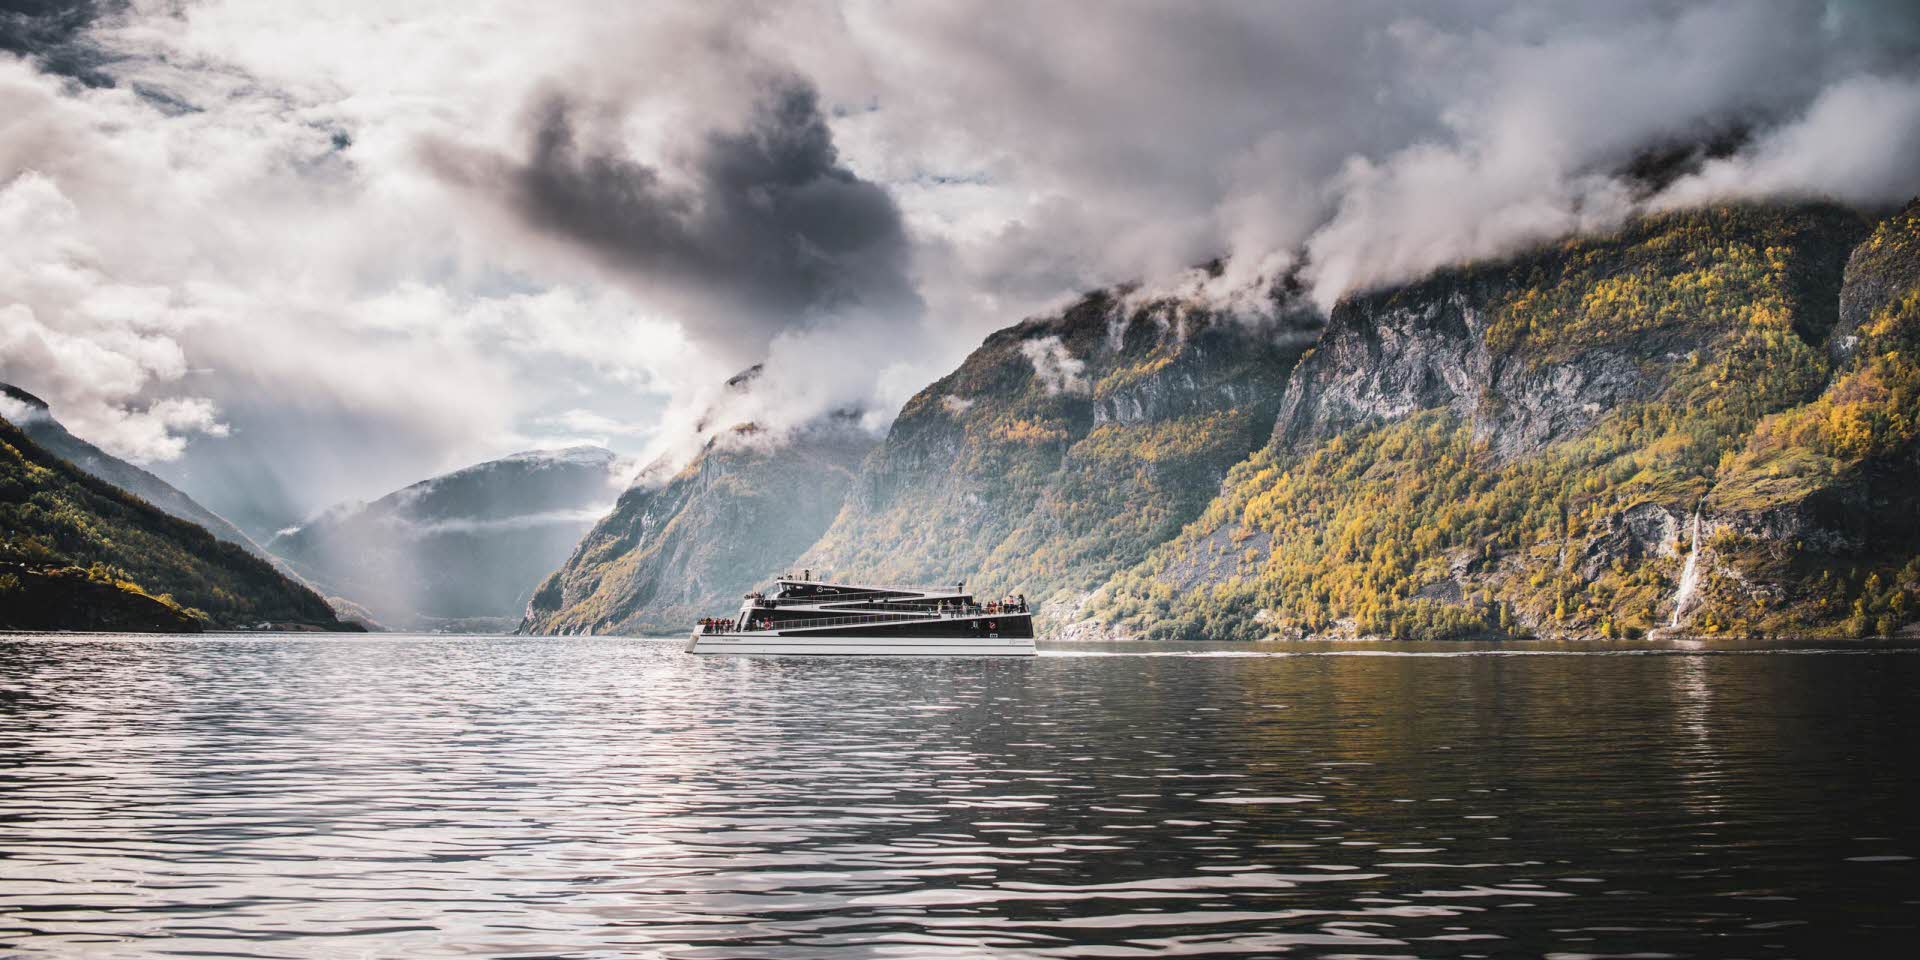 Future of The Fjords is seen in distance as sailing on cloudy and calm on the famous UNESCO Naeroyfjord in autumn